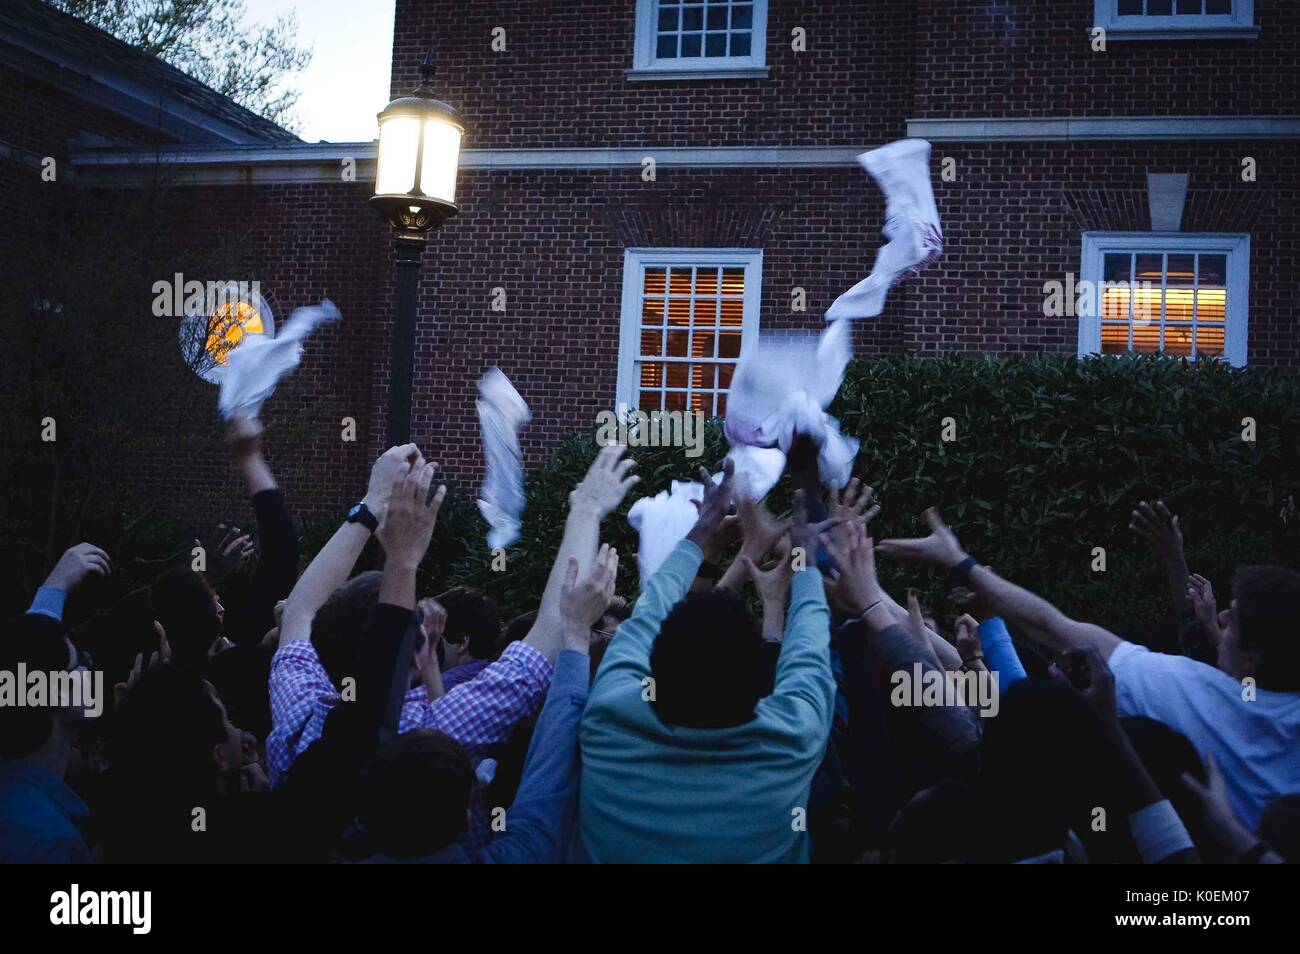 A crowd of college students reach their hands up high in order to try and catch t-shirts that are falling from above, 2014. Courtesy Eric Chen. Stock Photo